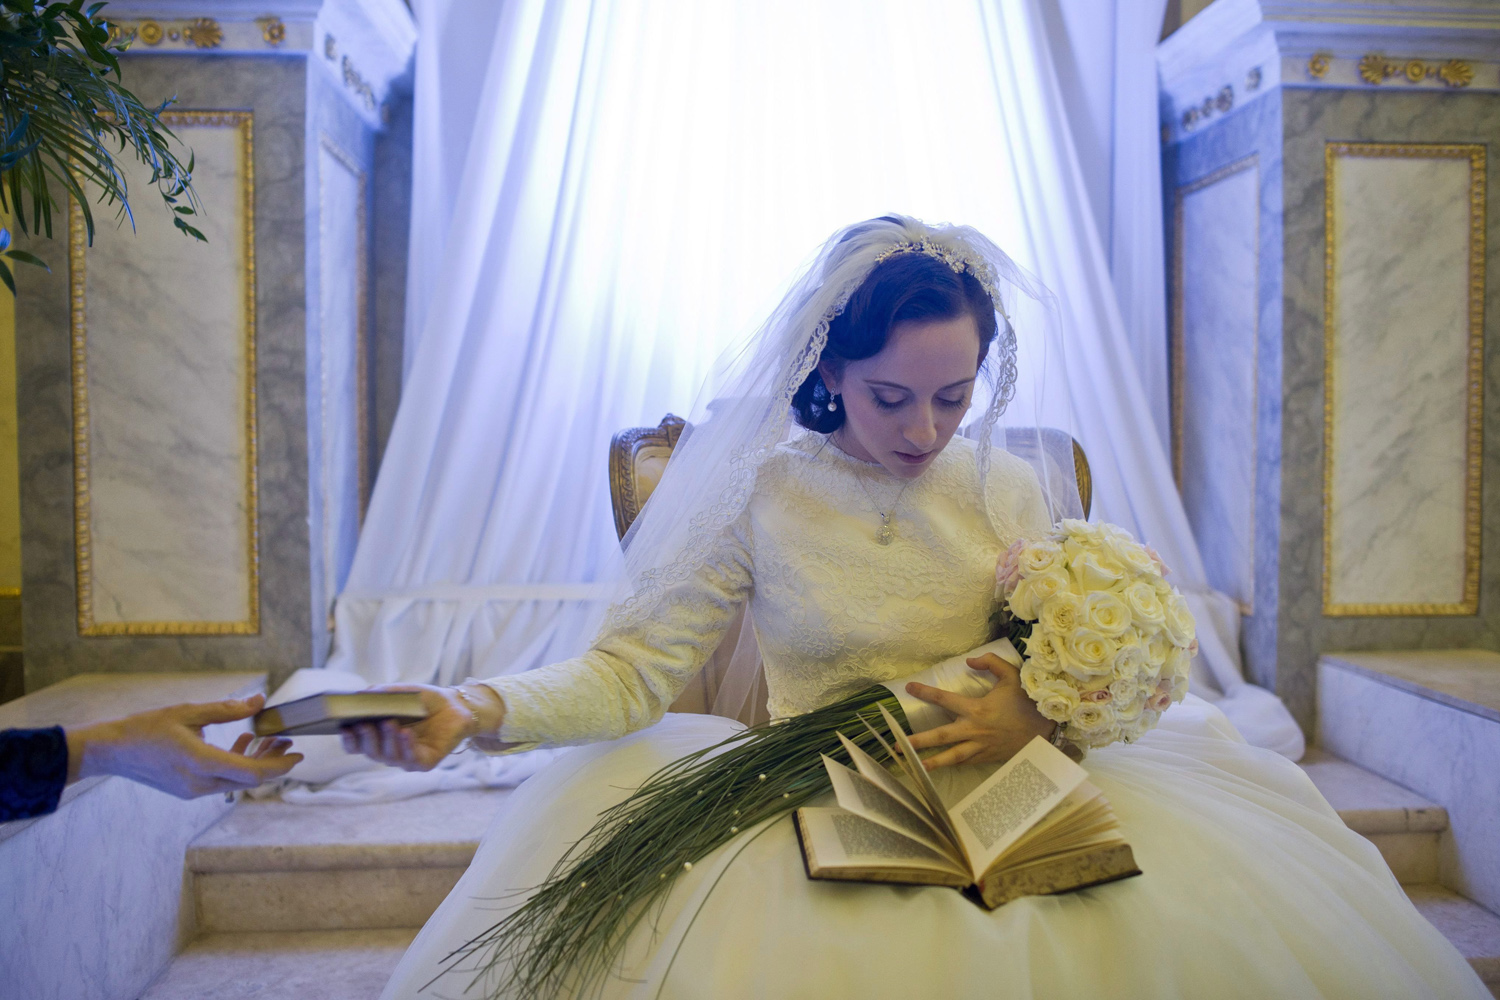 Mar. 5, 2014. Mussie Oberlander, daughter of Hungarian Chief Rabbi Baruch Oberlander, secretary general of Rabbinical Center of Europe (RCE) and establisher of the Hungarian Chabad-Lubavitch trend,  prays during her traditional Jewish wedding in the Obuda Synagogue in Budapest, Hungary.